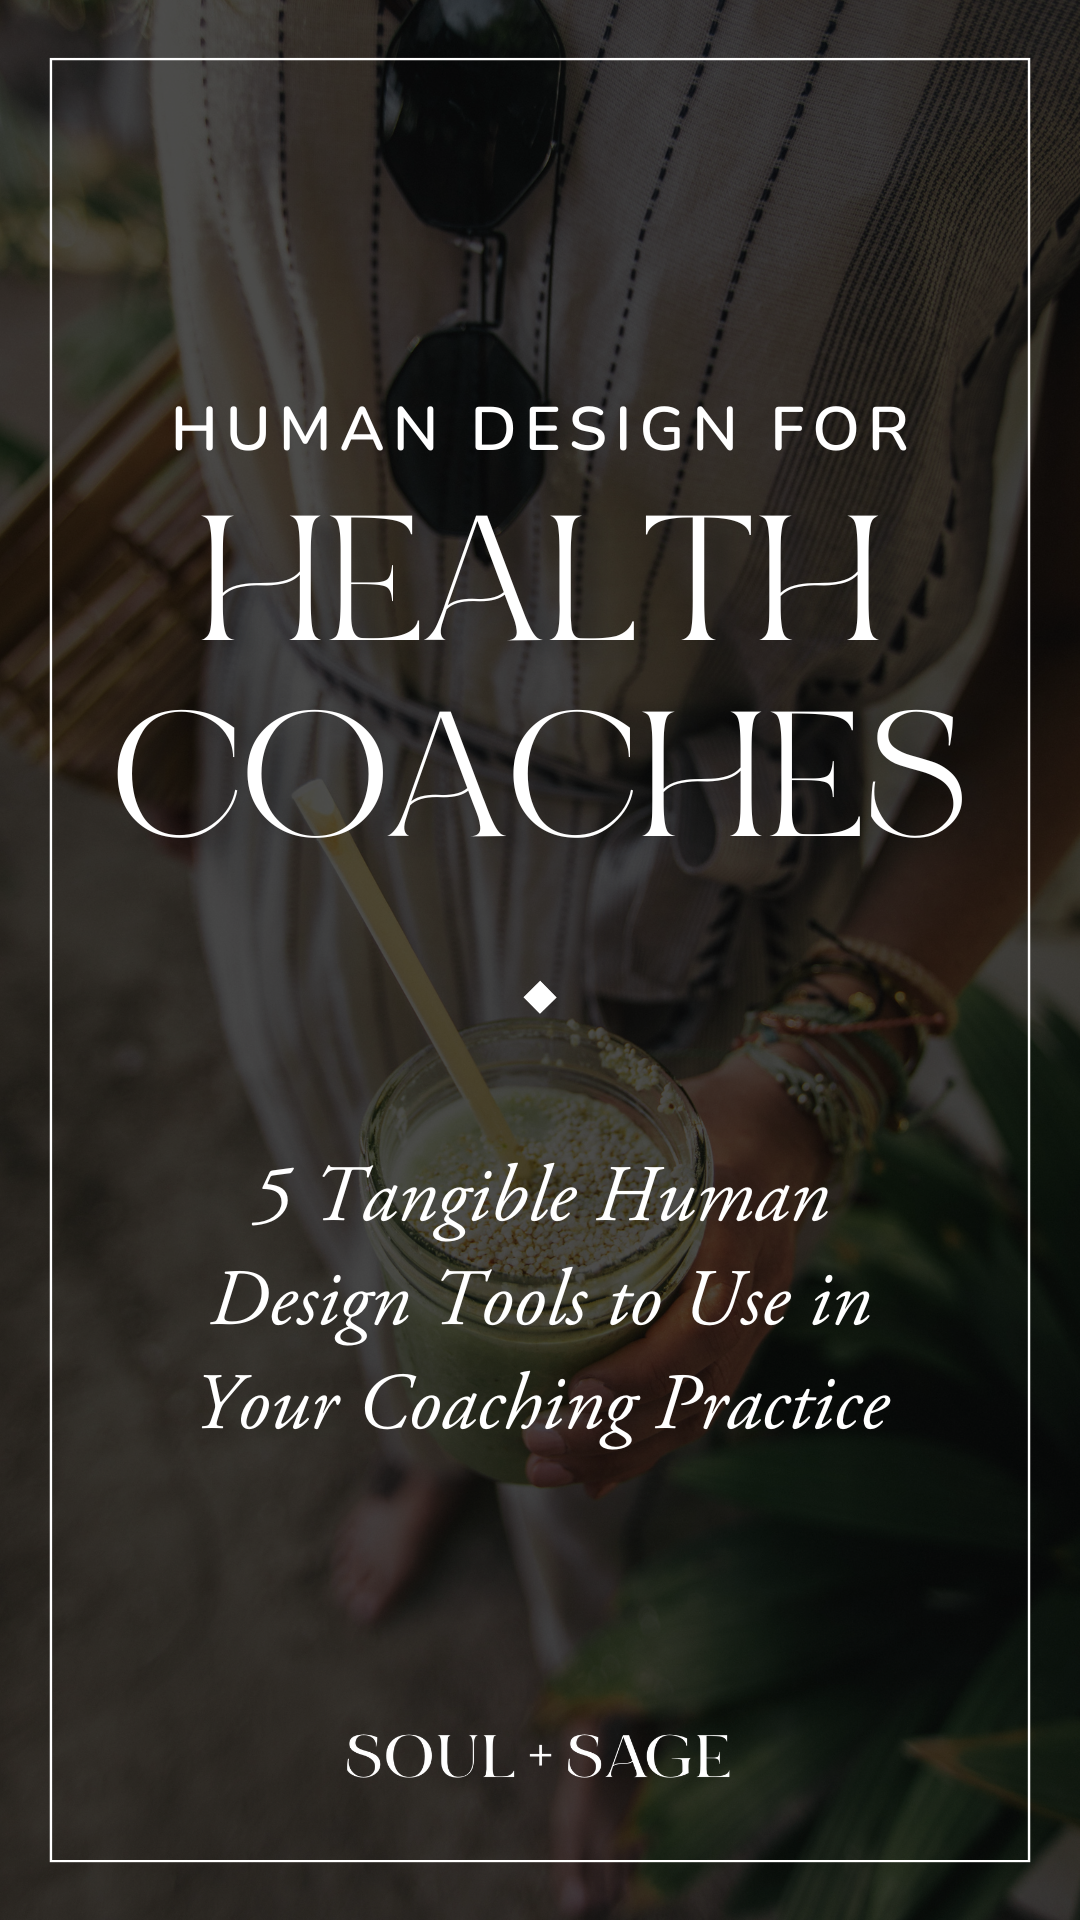 Human Design for Health Coaches - Five Tangible Human Design Tools to Utilize in Your Coaching Practice